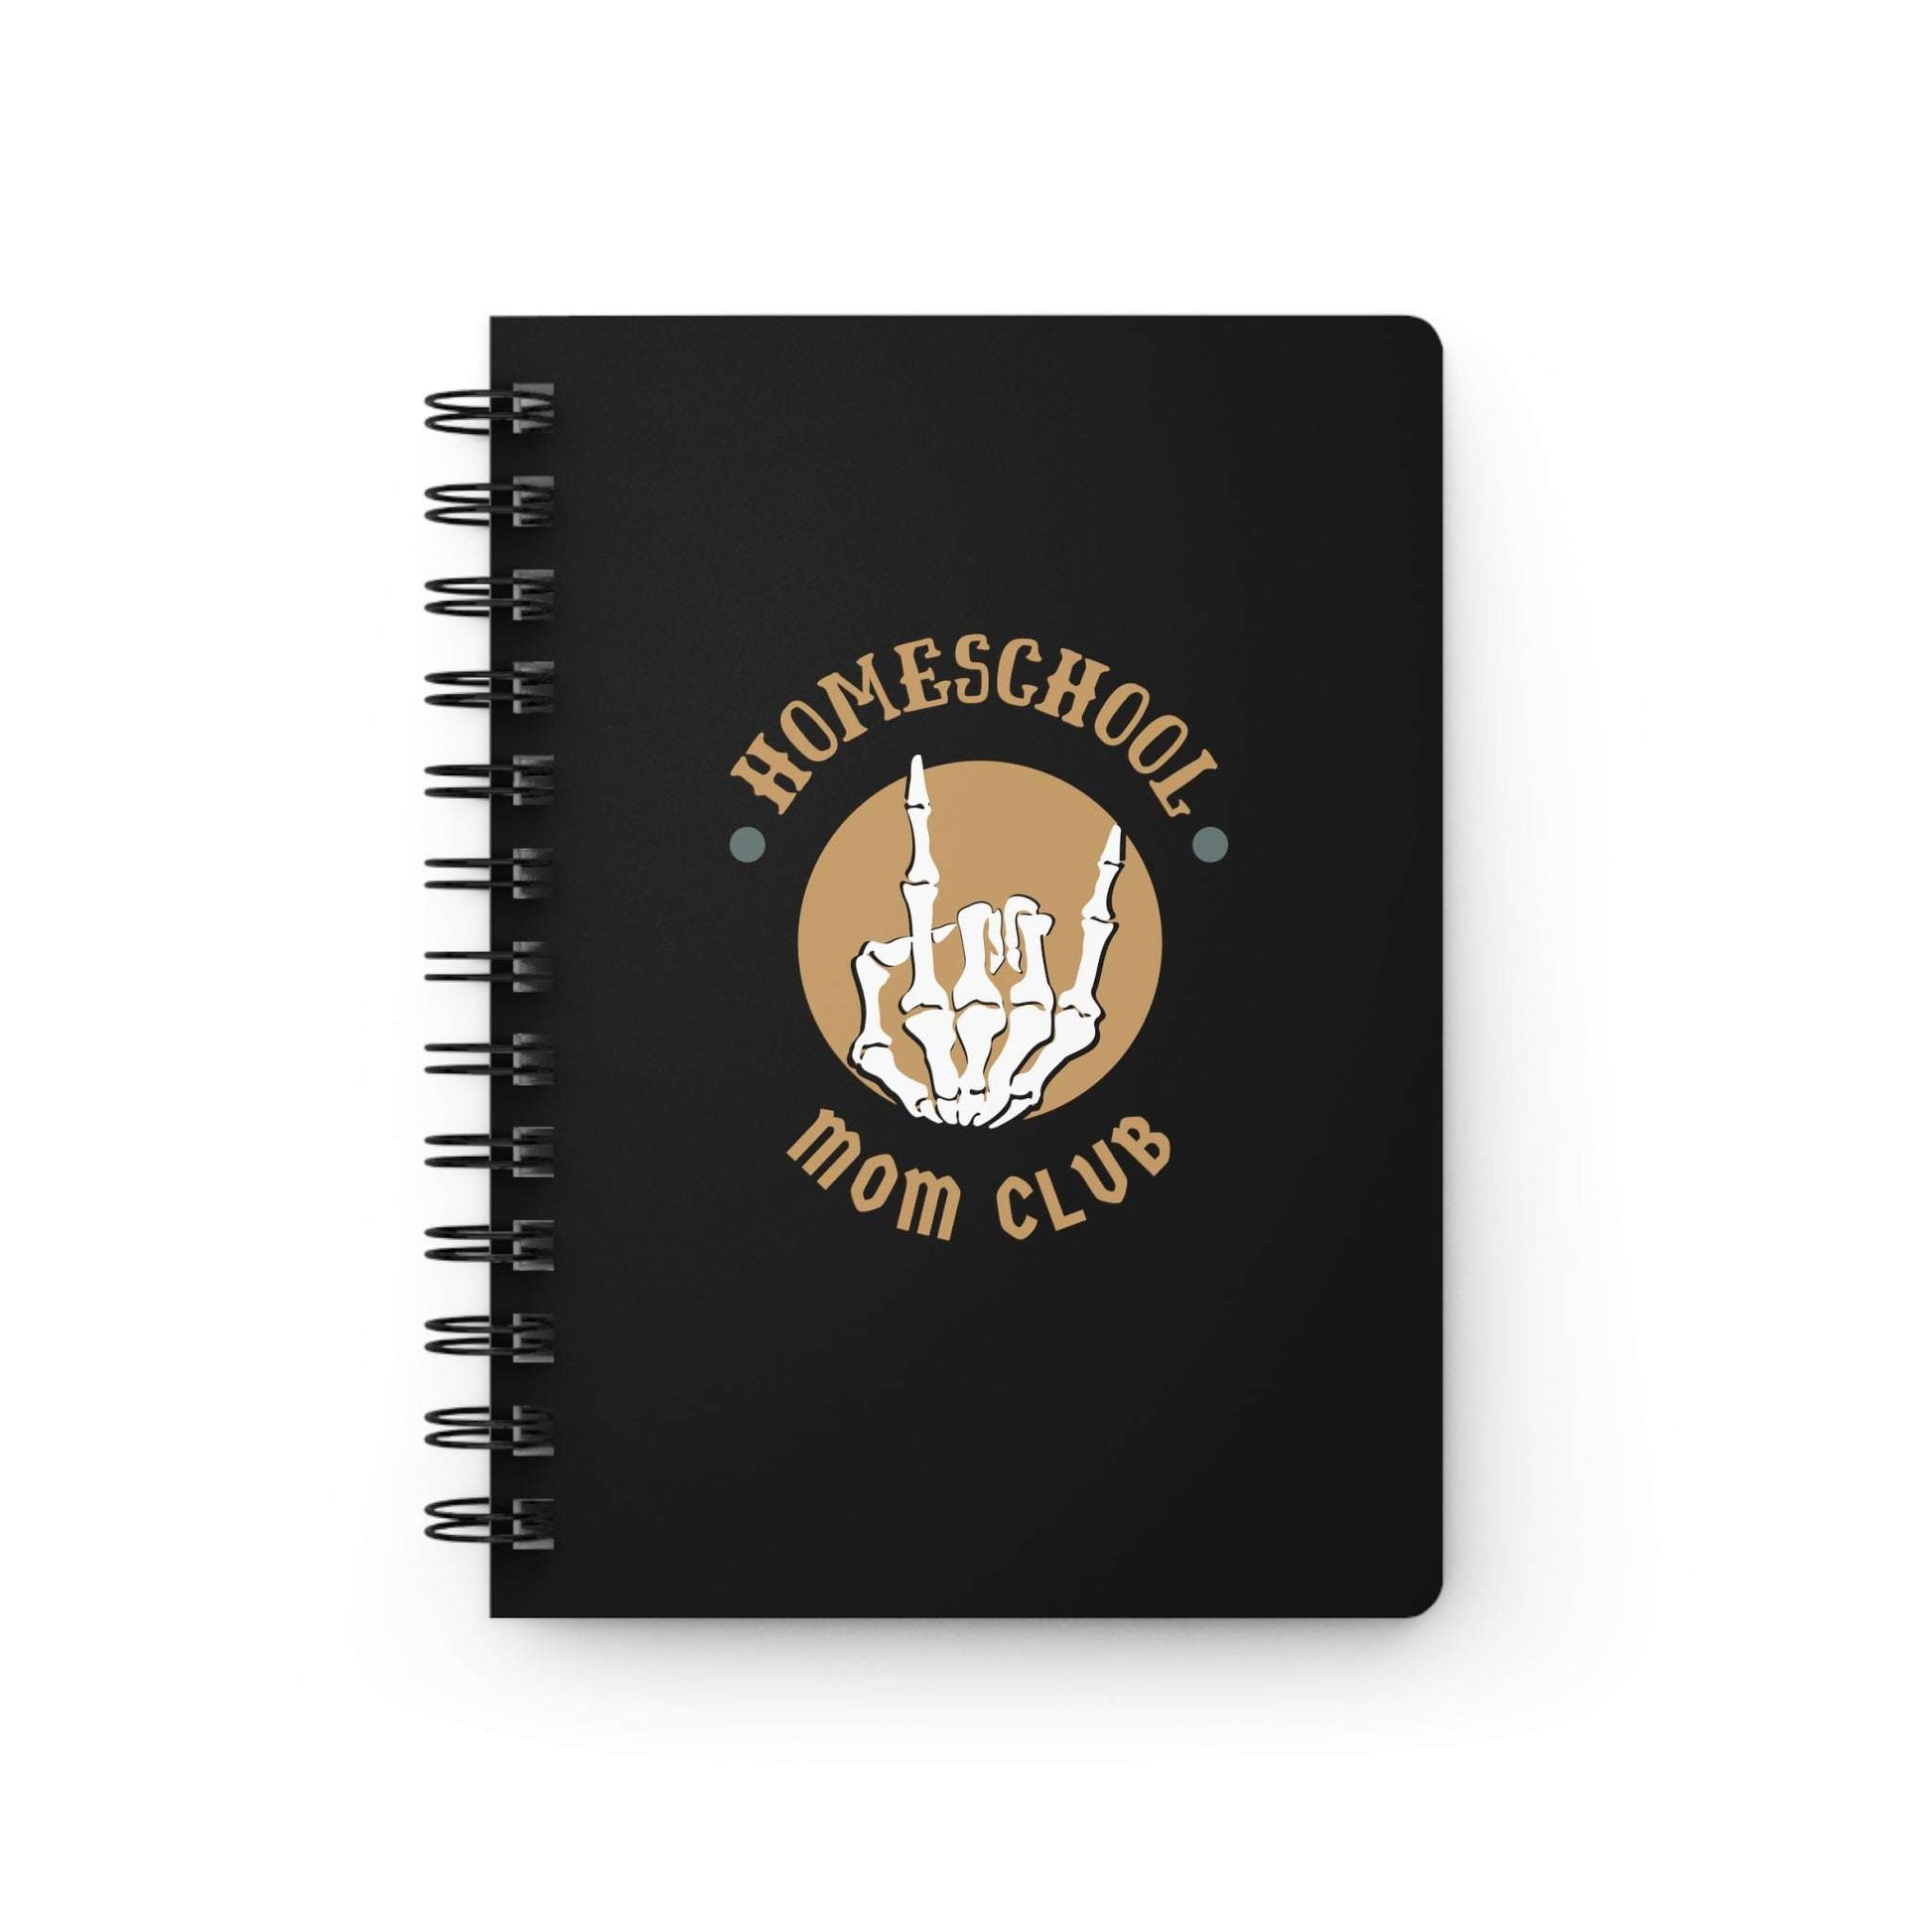 Homeschool Mom Club Spiral Bound JournalWolfe Paw DesignsHomeschool Mom Club Spiral Bound JournalWrite down your goals and lists in style in this Homeschool Mom Club spiral-bound journal. This notebook features a thick gloss full-color laminated protective coverHomeschool Mom Club Spiral Bound Journal